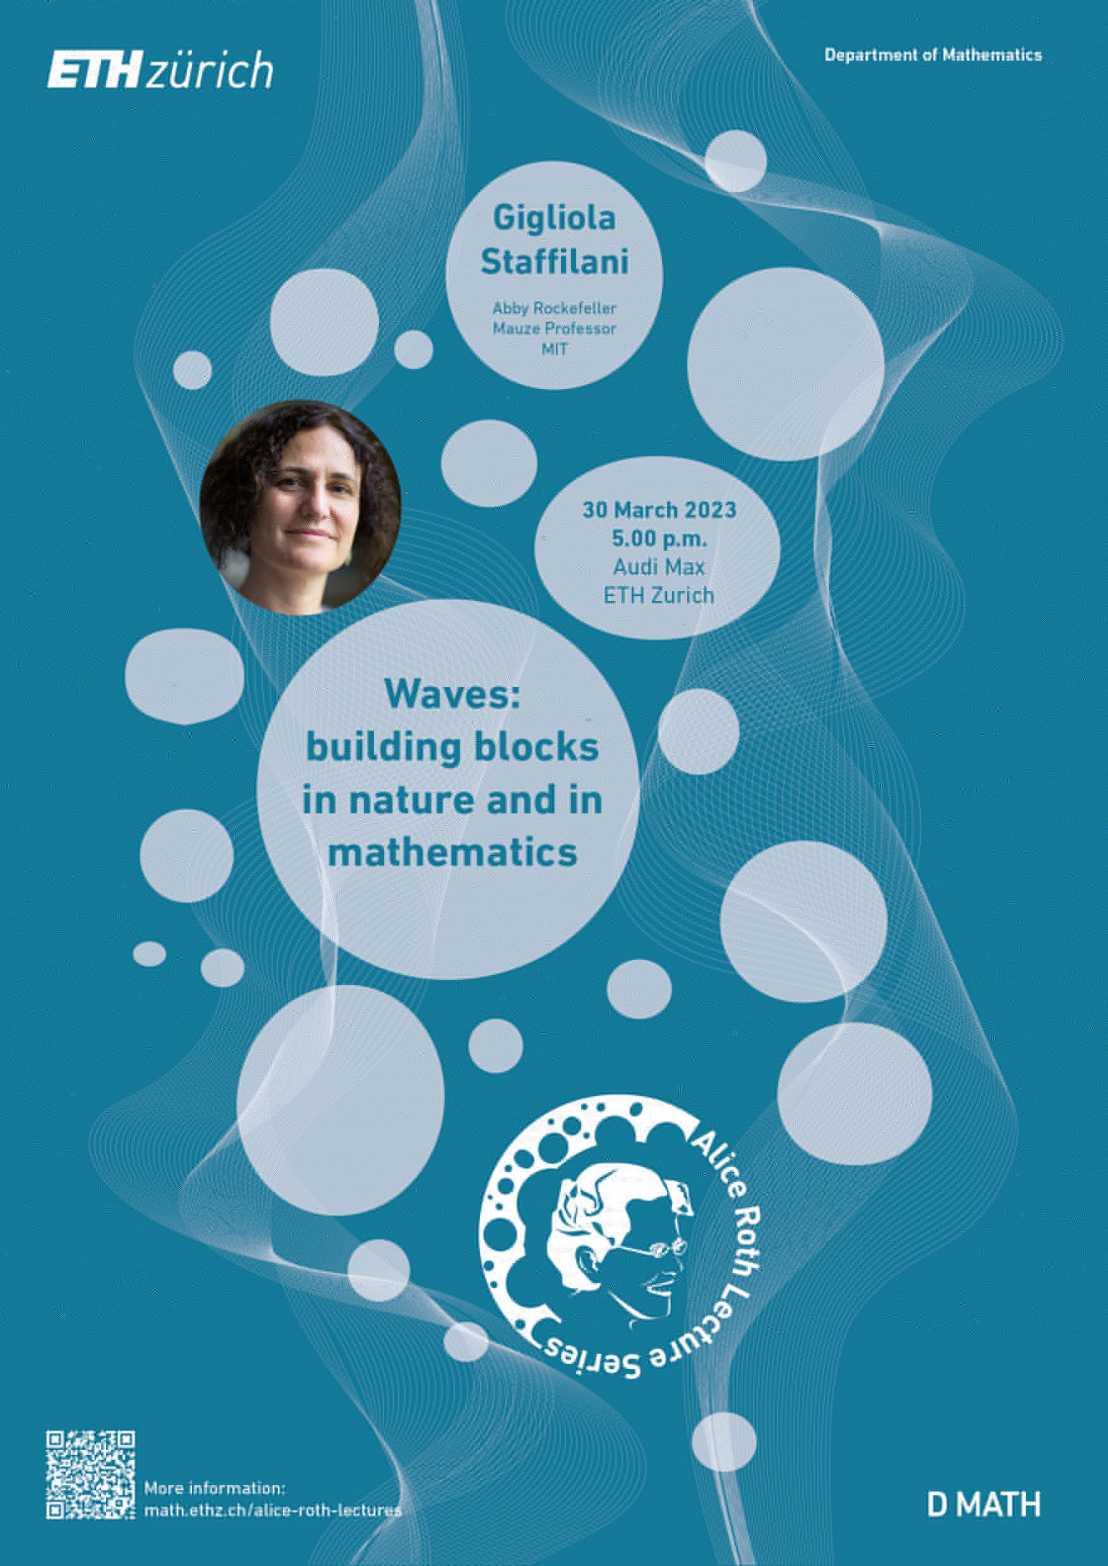 Enlarged view: Poster announcing the Alice Roth Lecture by Gigliola Staffilani